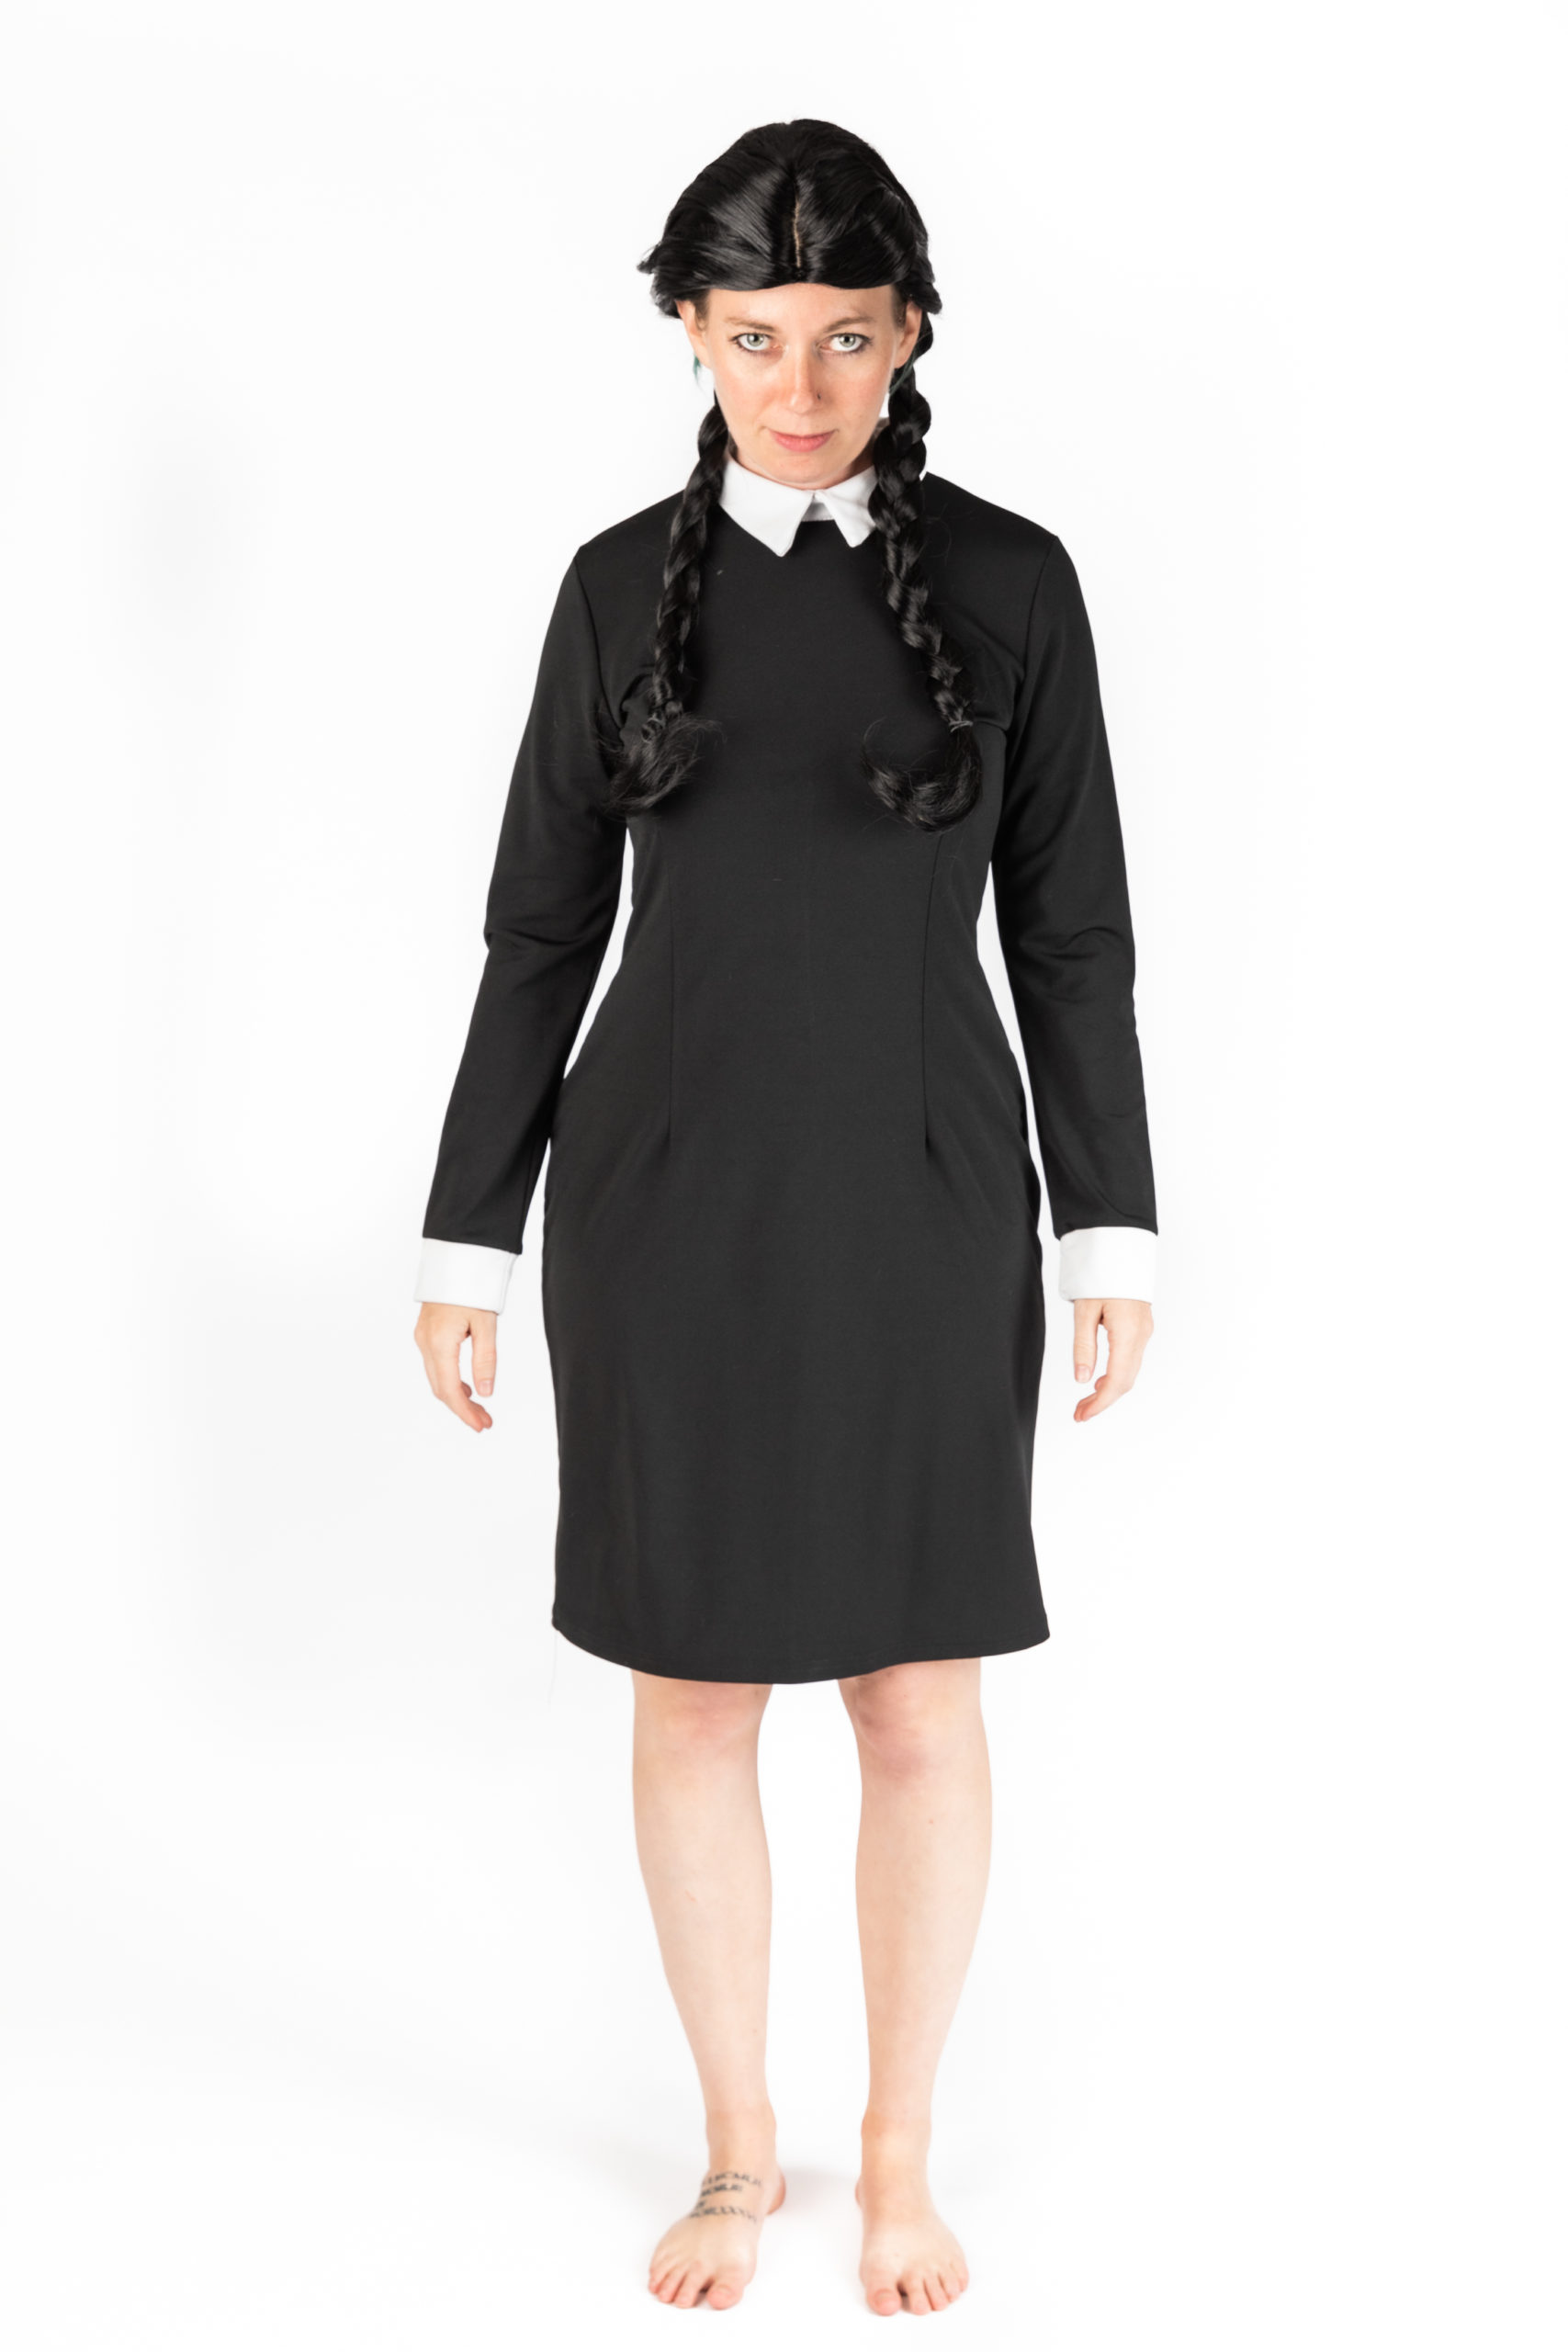 Wednesday Addams - Trove Costumes